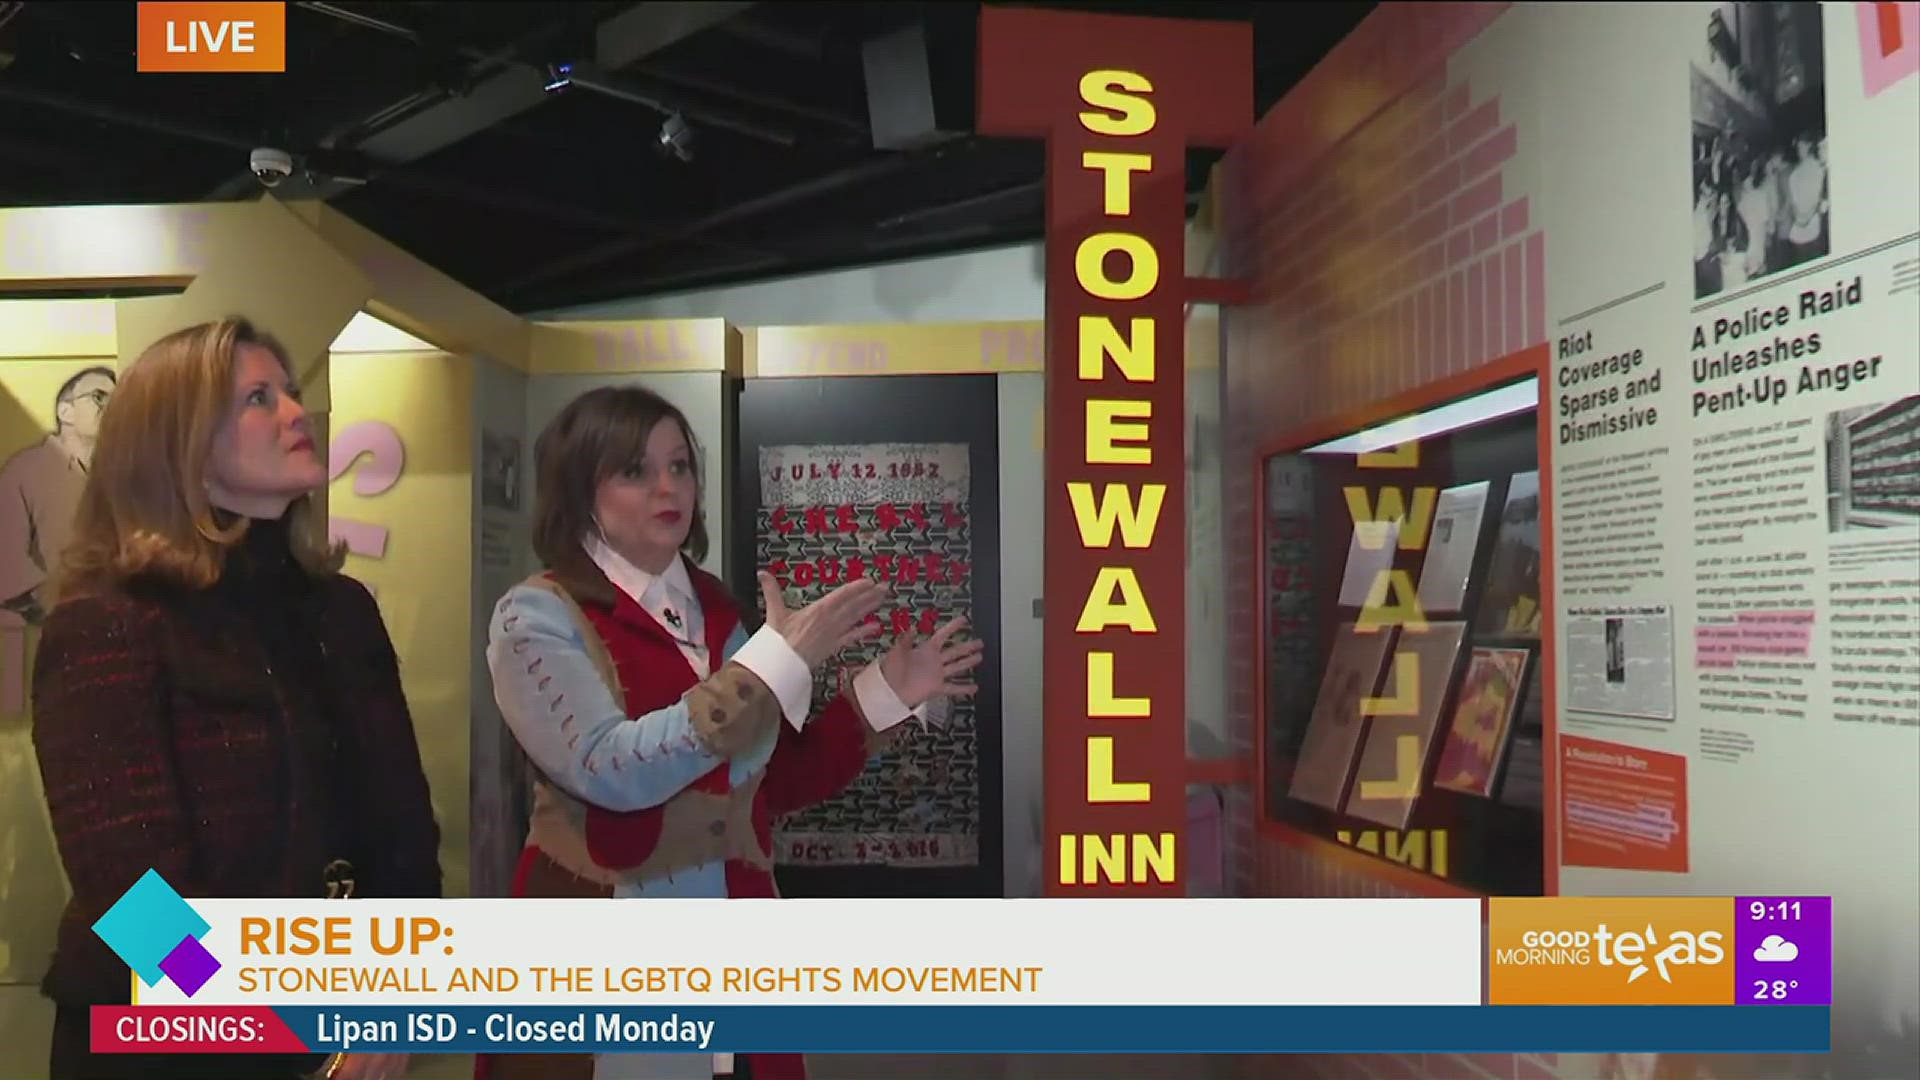 Rise Up: Stonewall and the LGBTQ Rights Movement is on exhibit at exhibit at the Dallas Holocaust and Human Rights Museum through June 18